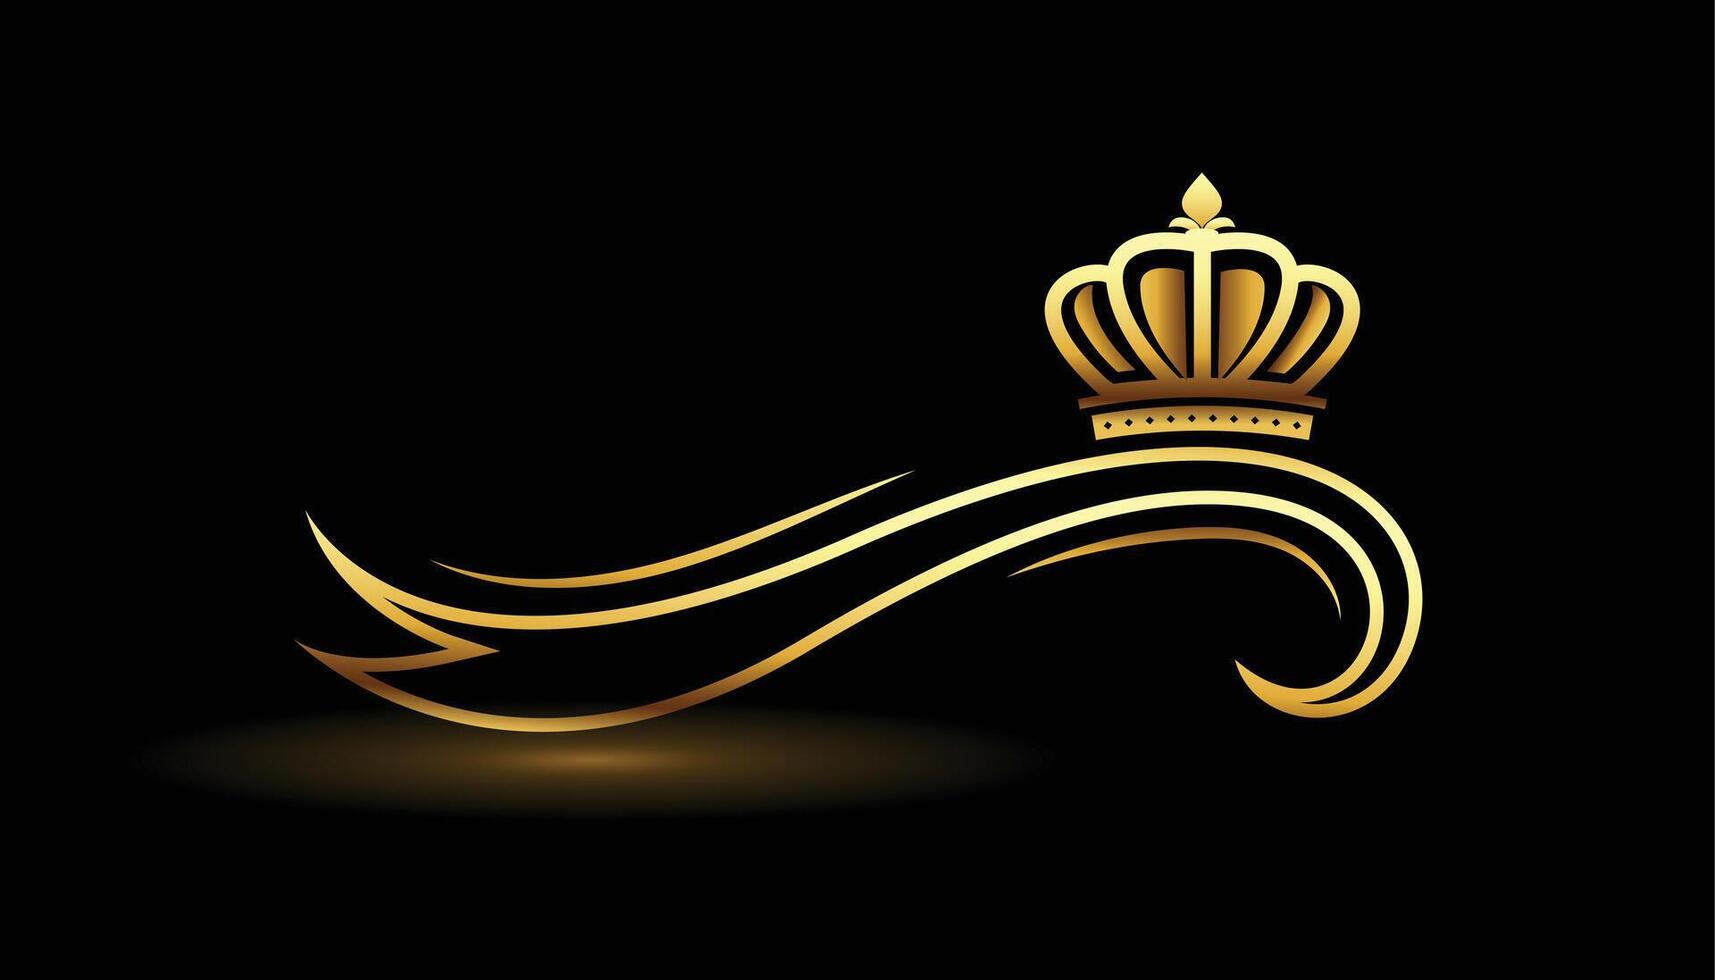 stylish golden crown background for majestic kingdom vector